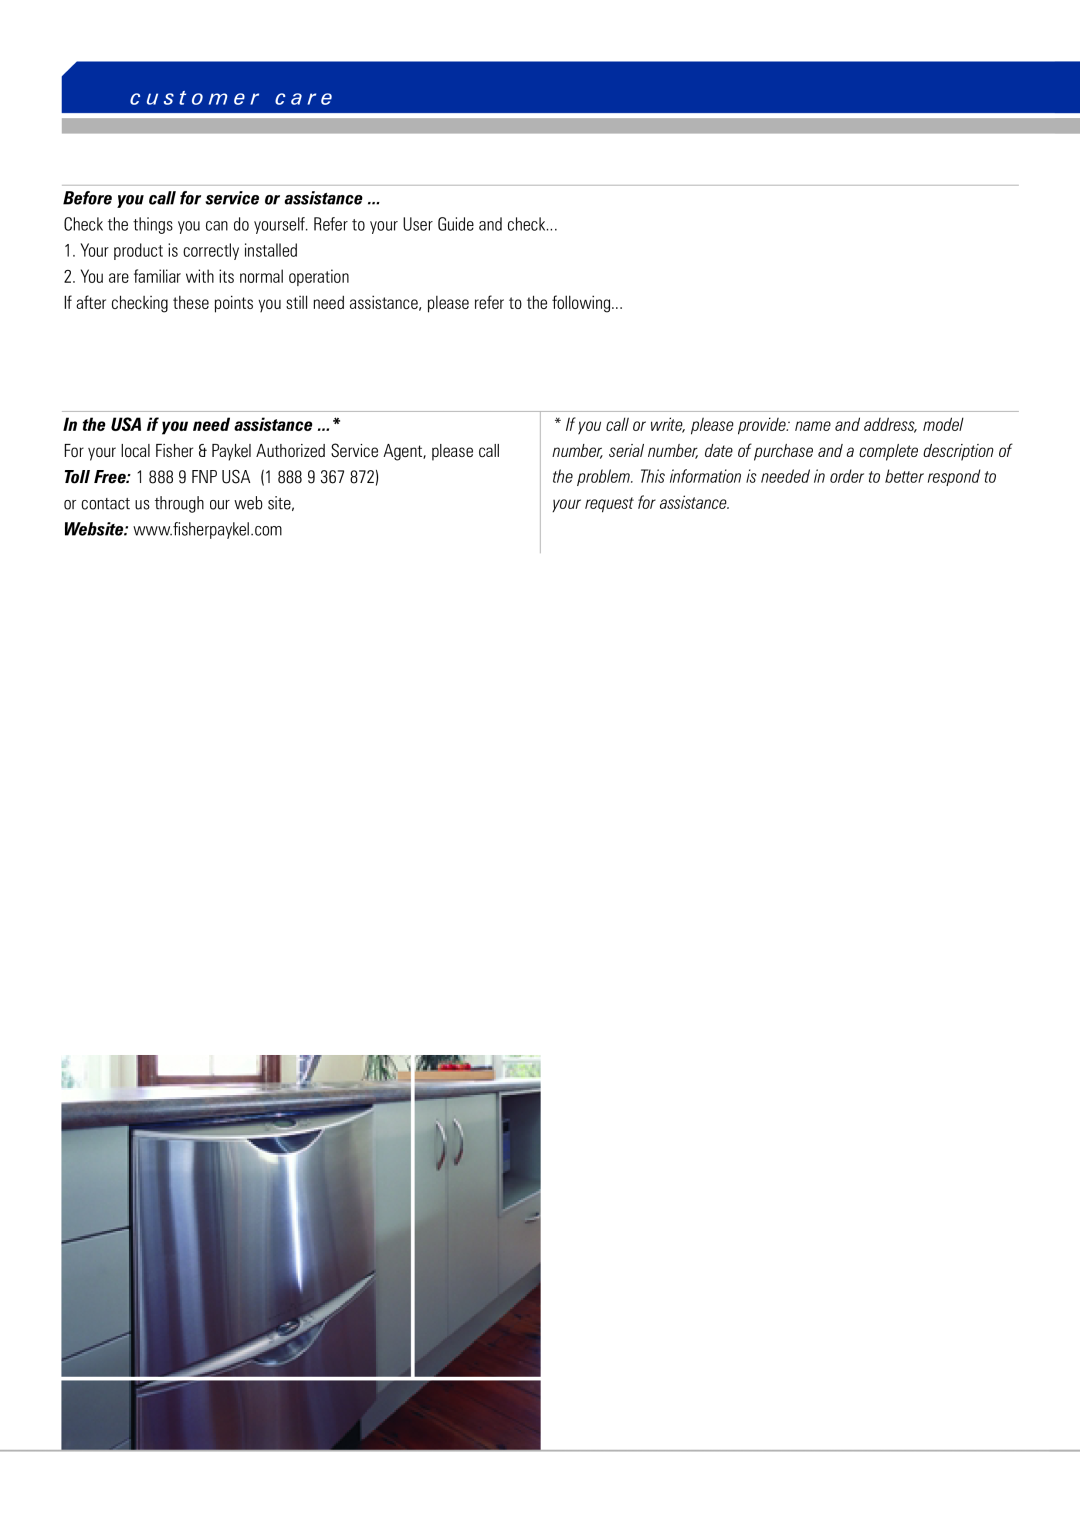 Fisher & Paykel DishDrawer manual c u s t o m e r c a r e, Before you call for service or assistance 